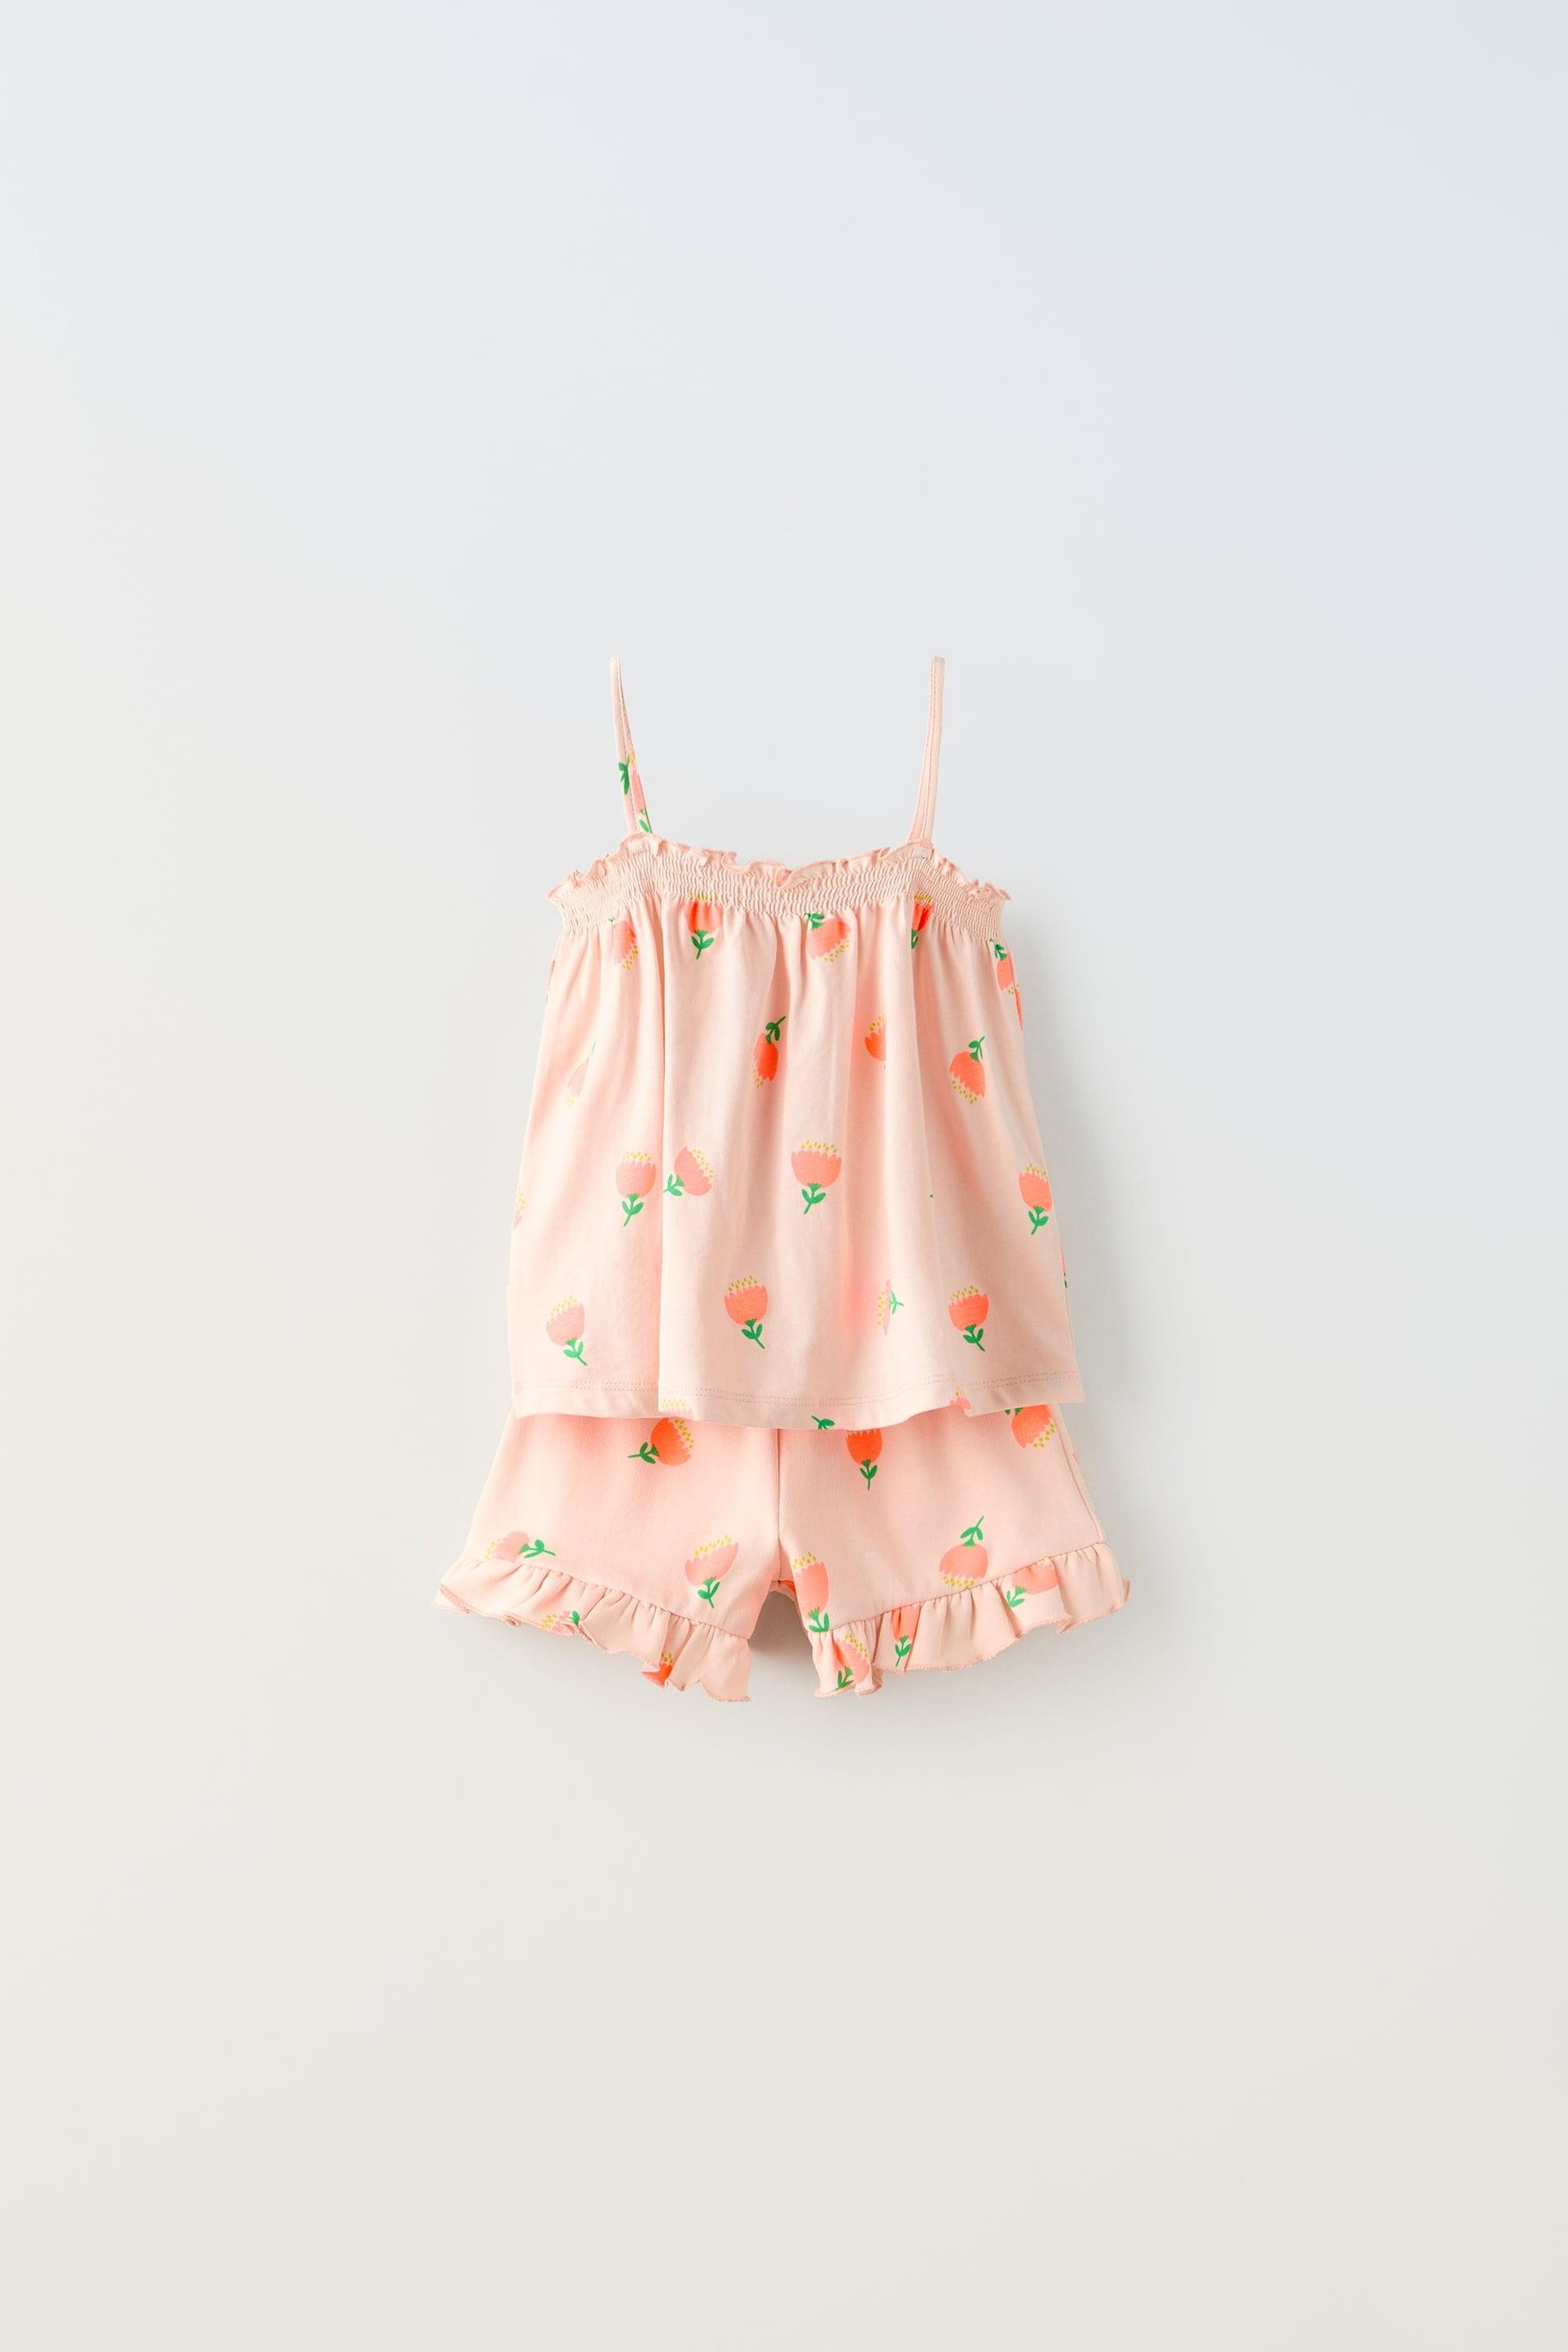 FLORAL TOP AND SHORTS MATCHING SET by ZARA